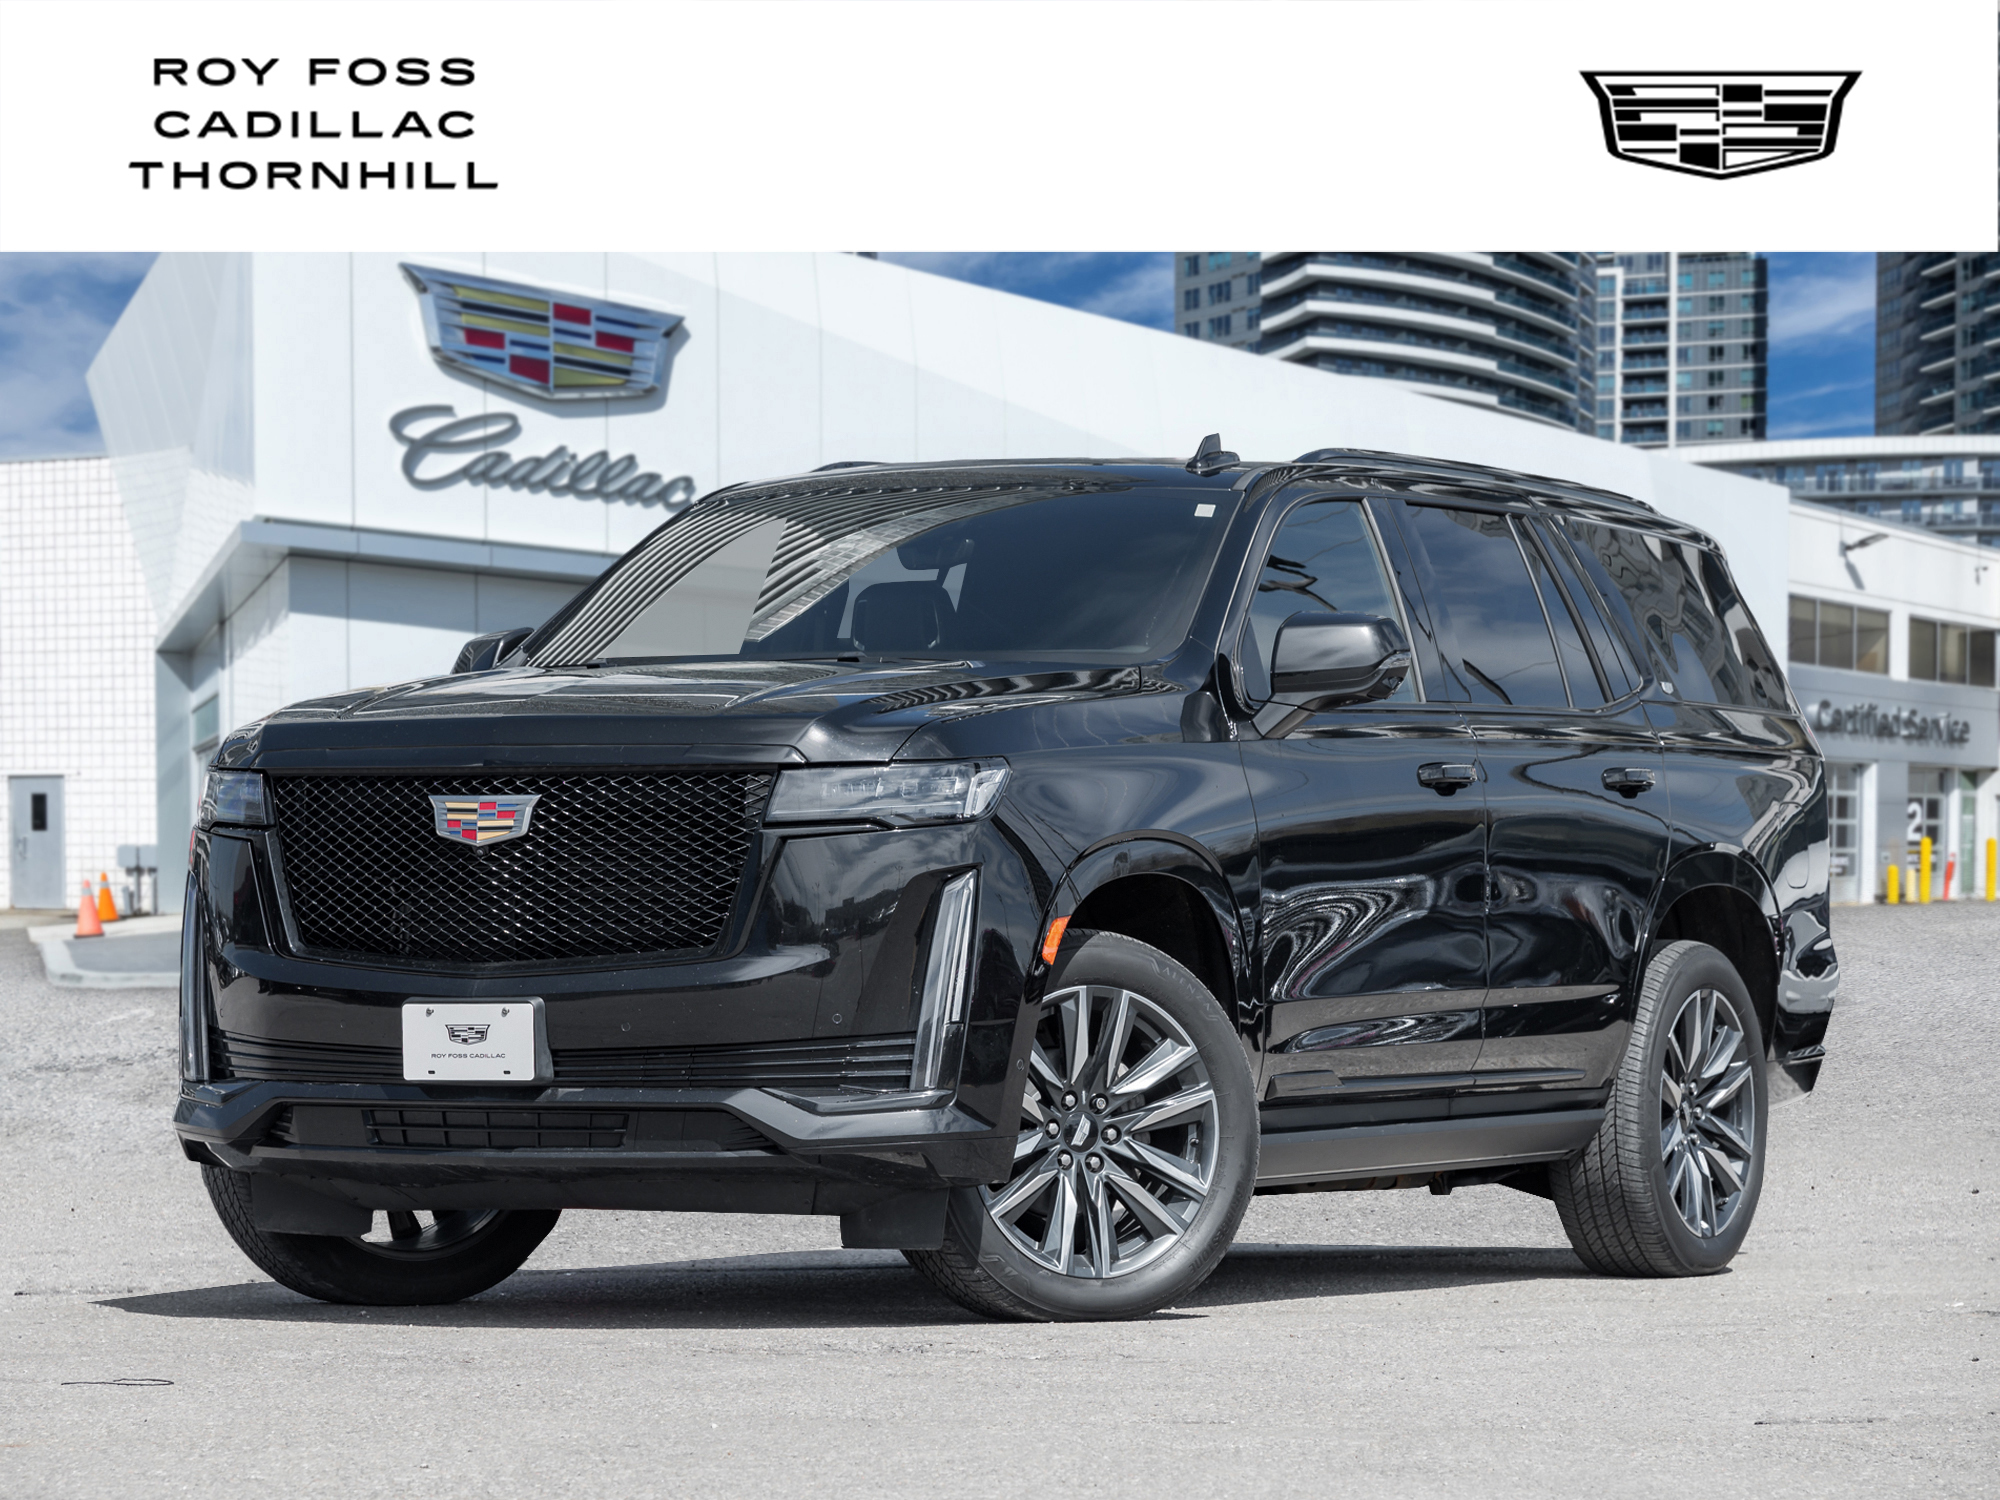 2021 Cadillac Escalade RATES STARTING FROM 4.99%+1 OWNER+CPO CERTIFIED